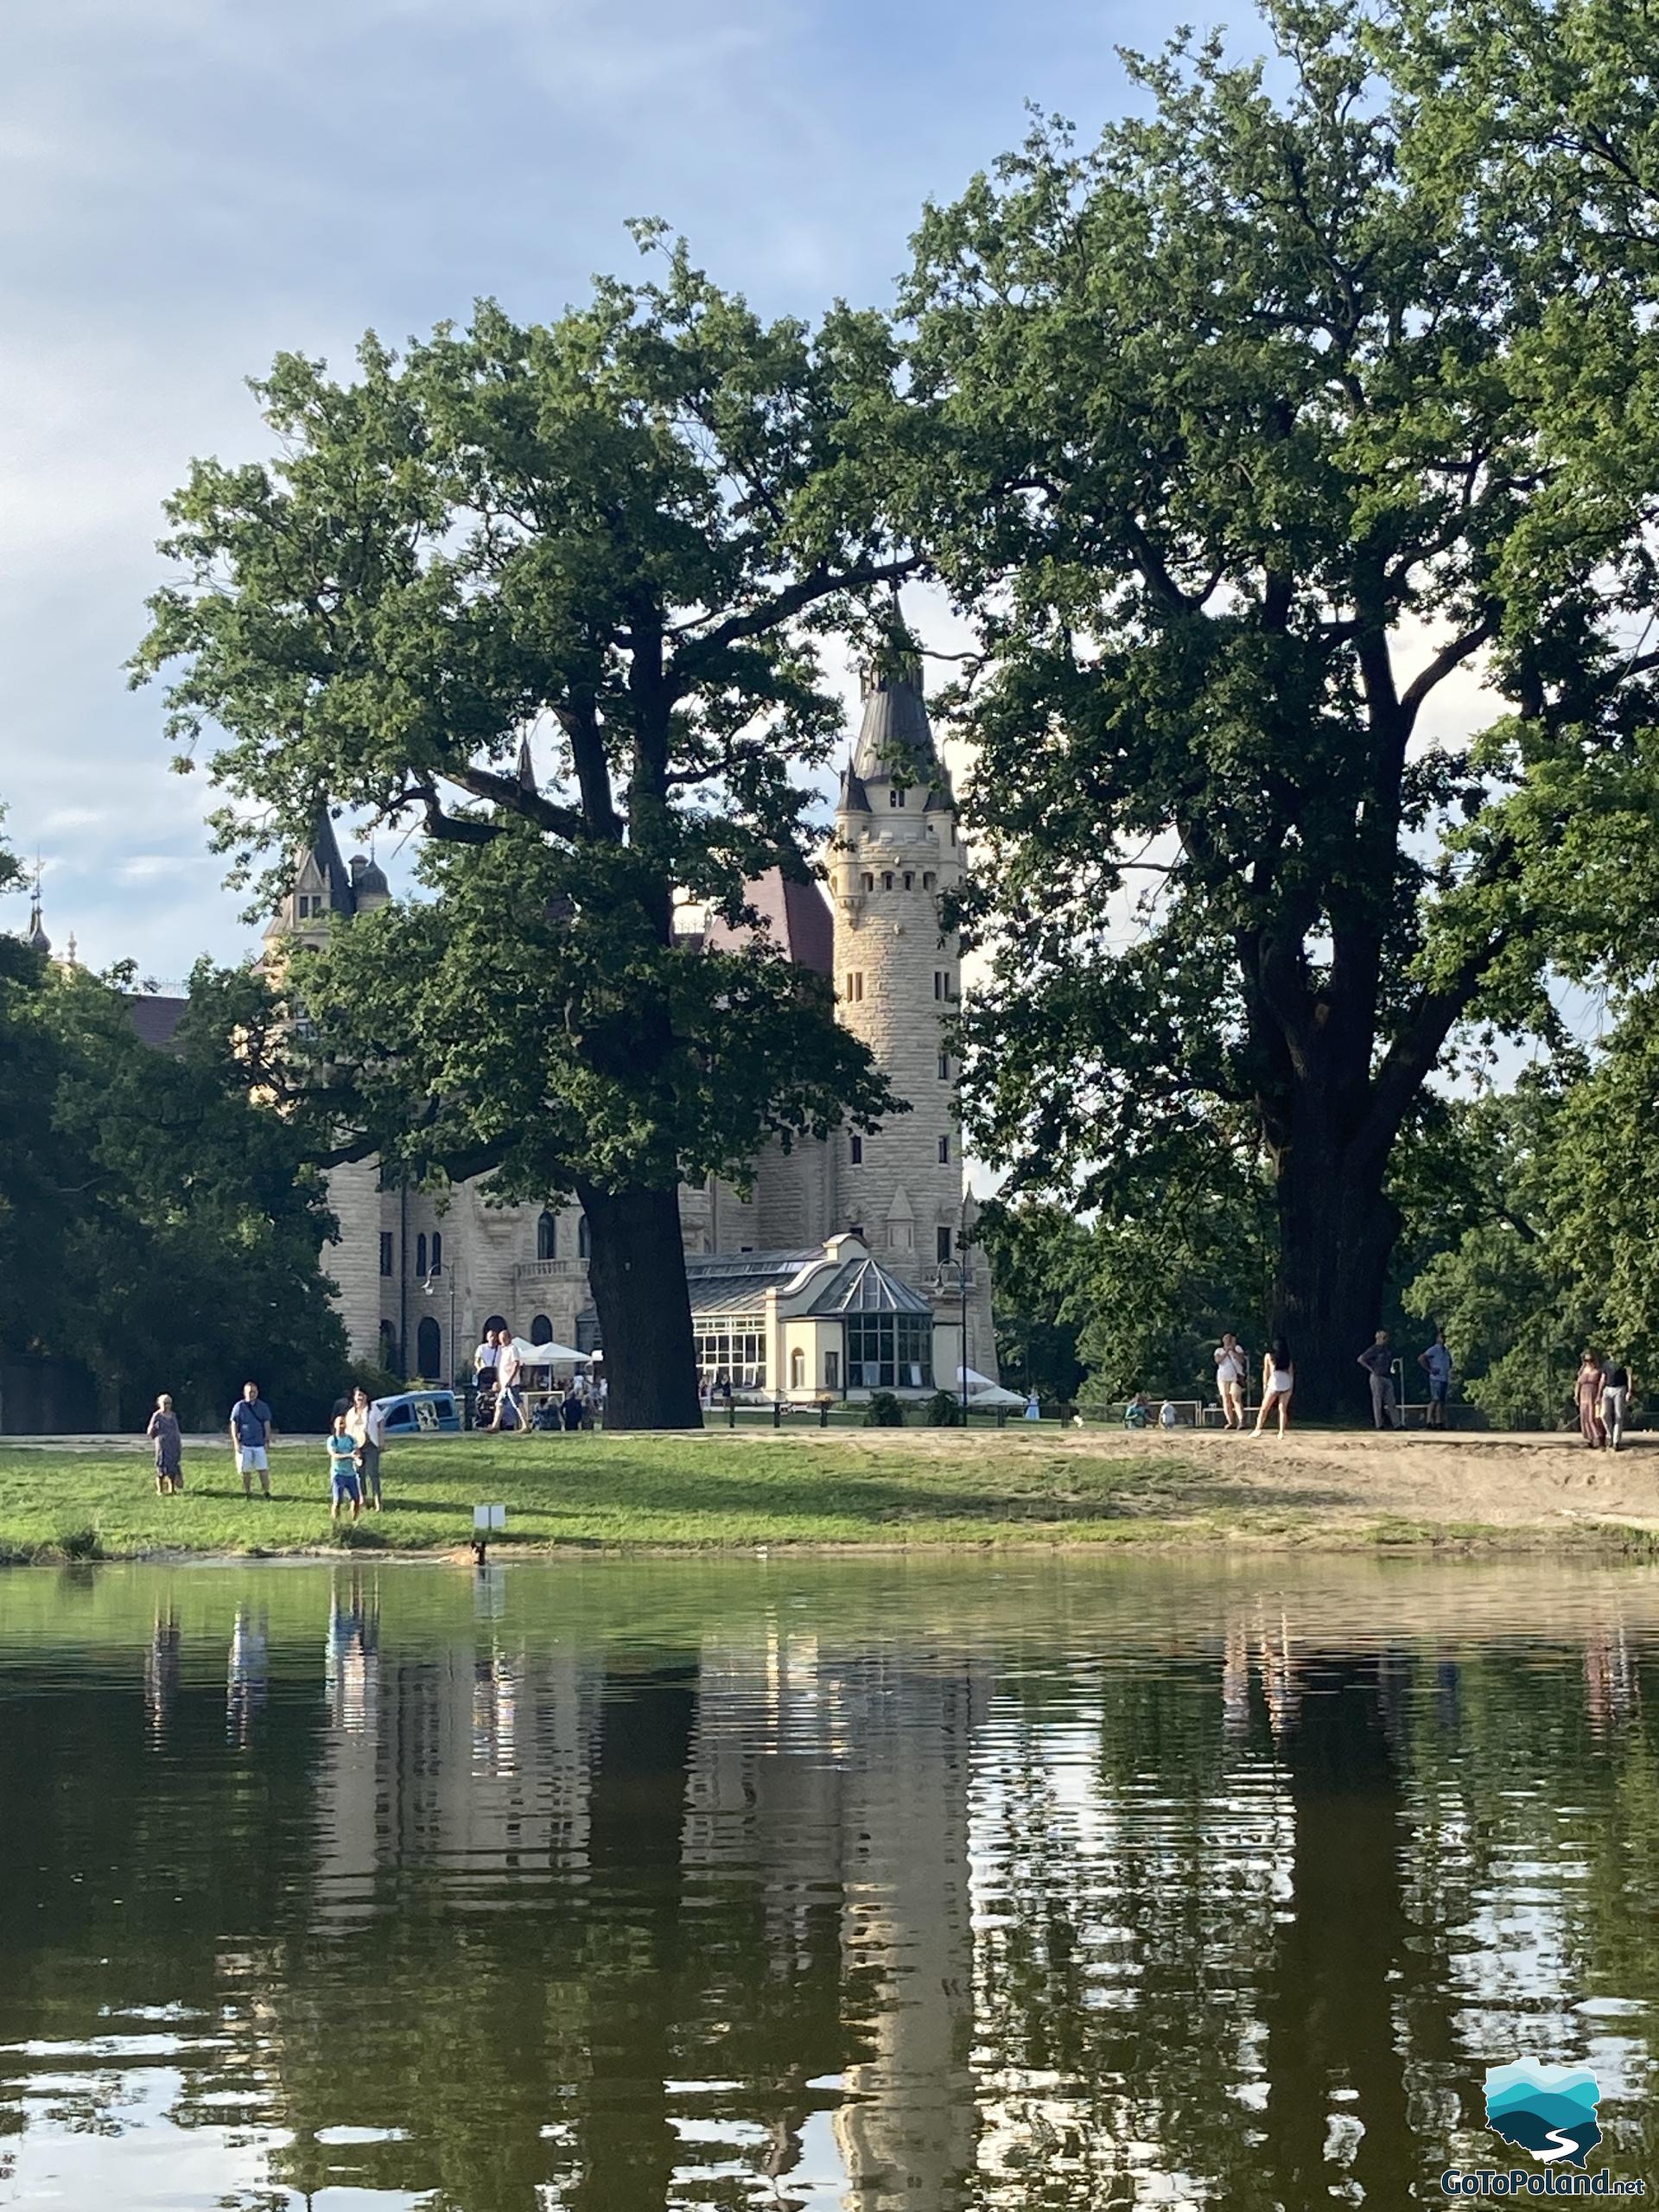 the castle seen from the pond